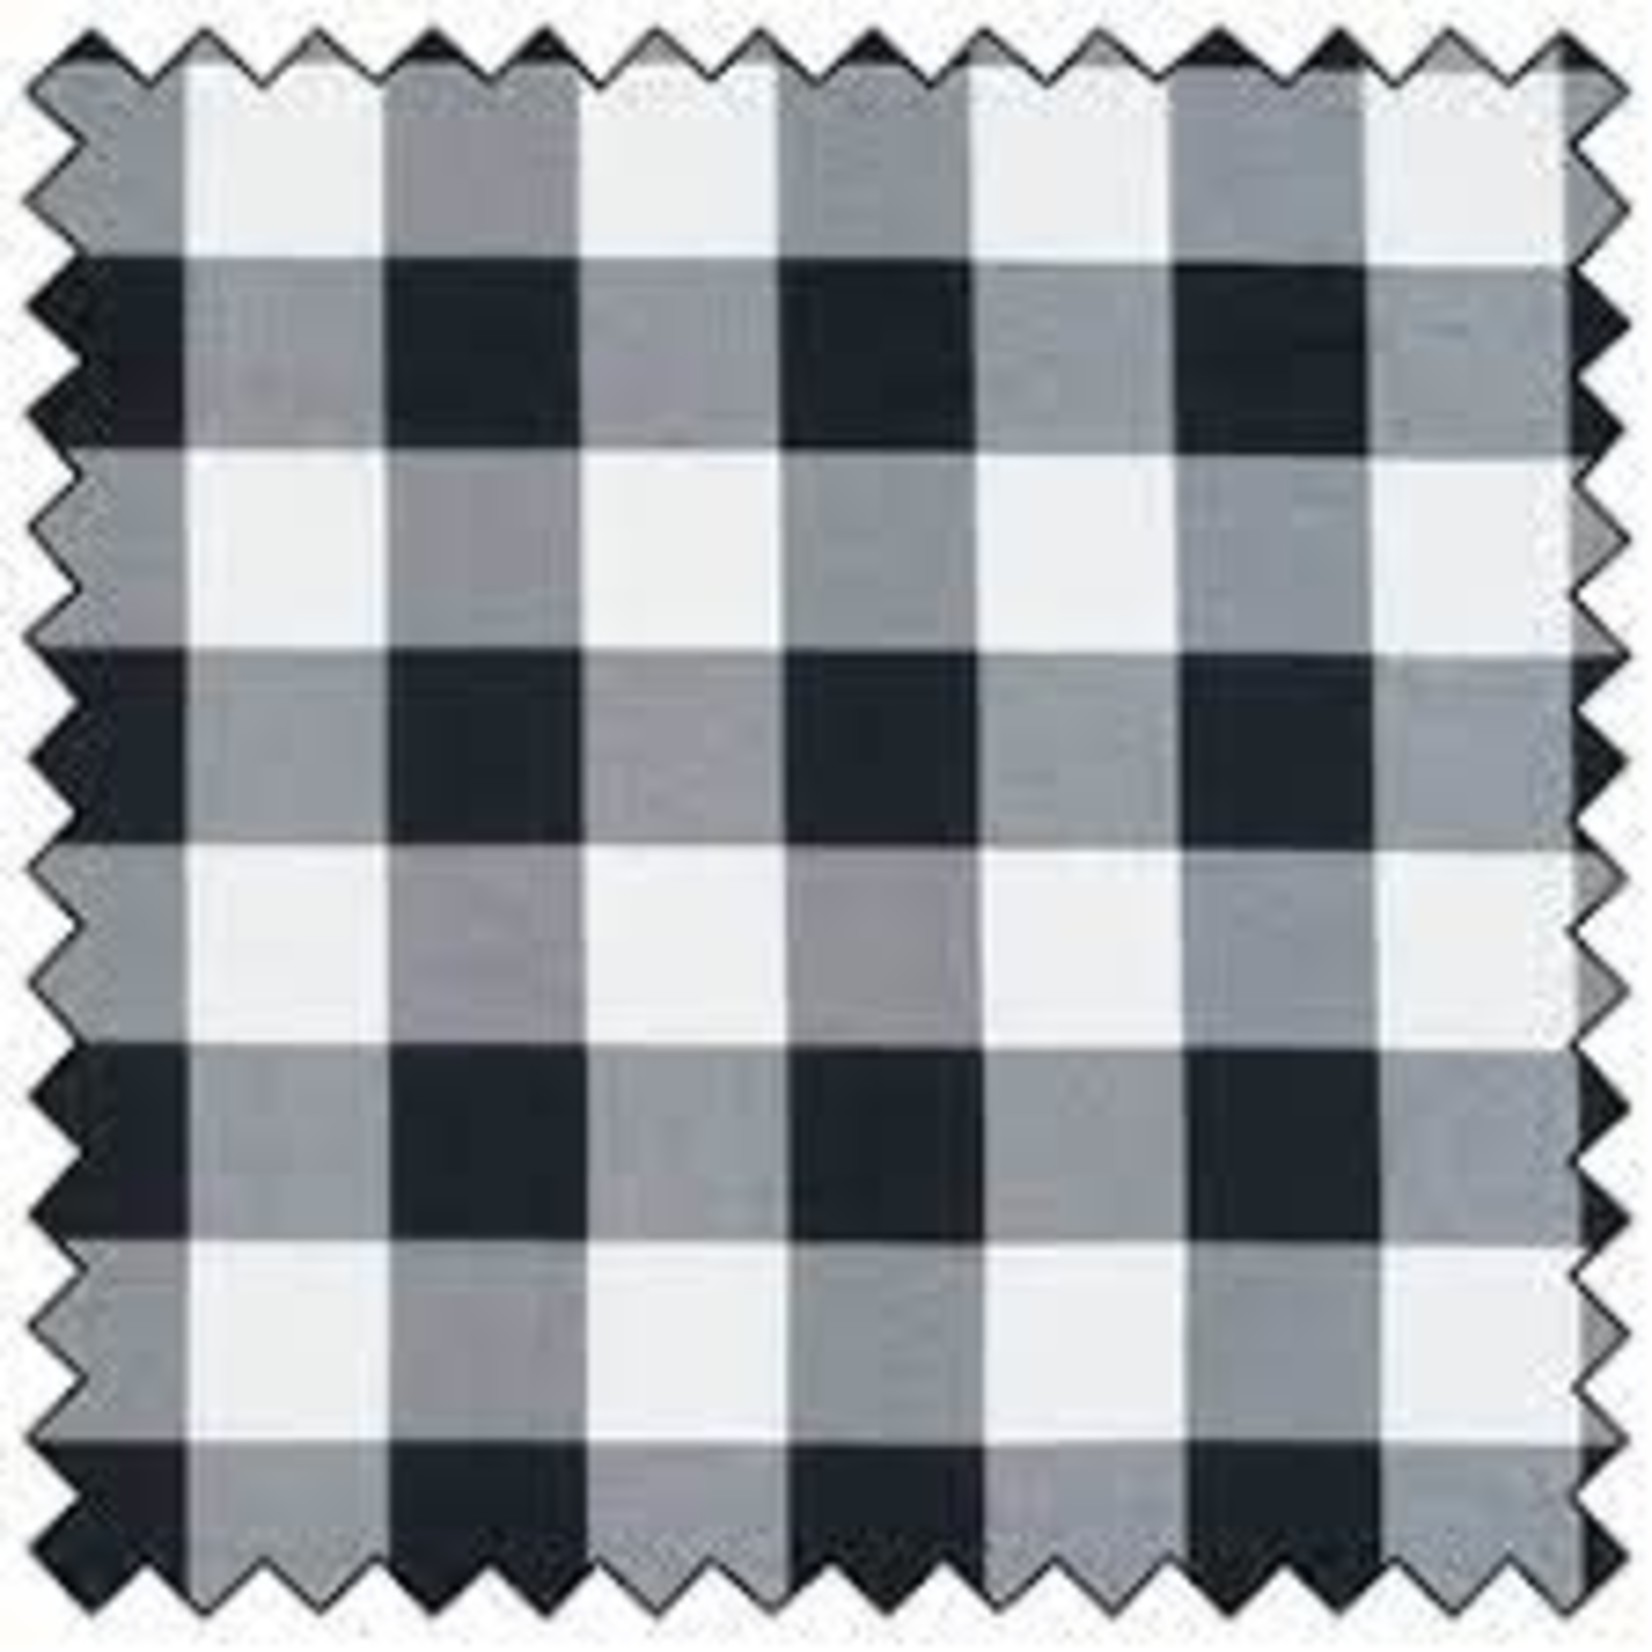 TIMBER! WHITE BLACK FLANNEL- 60IN WIDE - 100% COTTON - PER METER